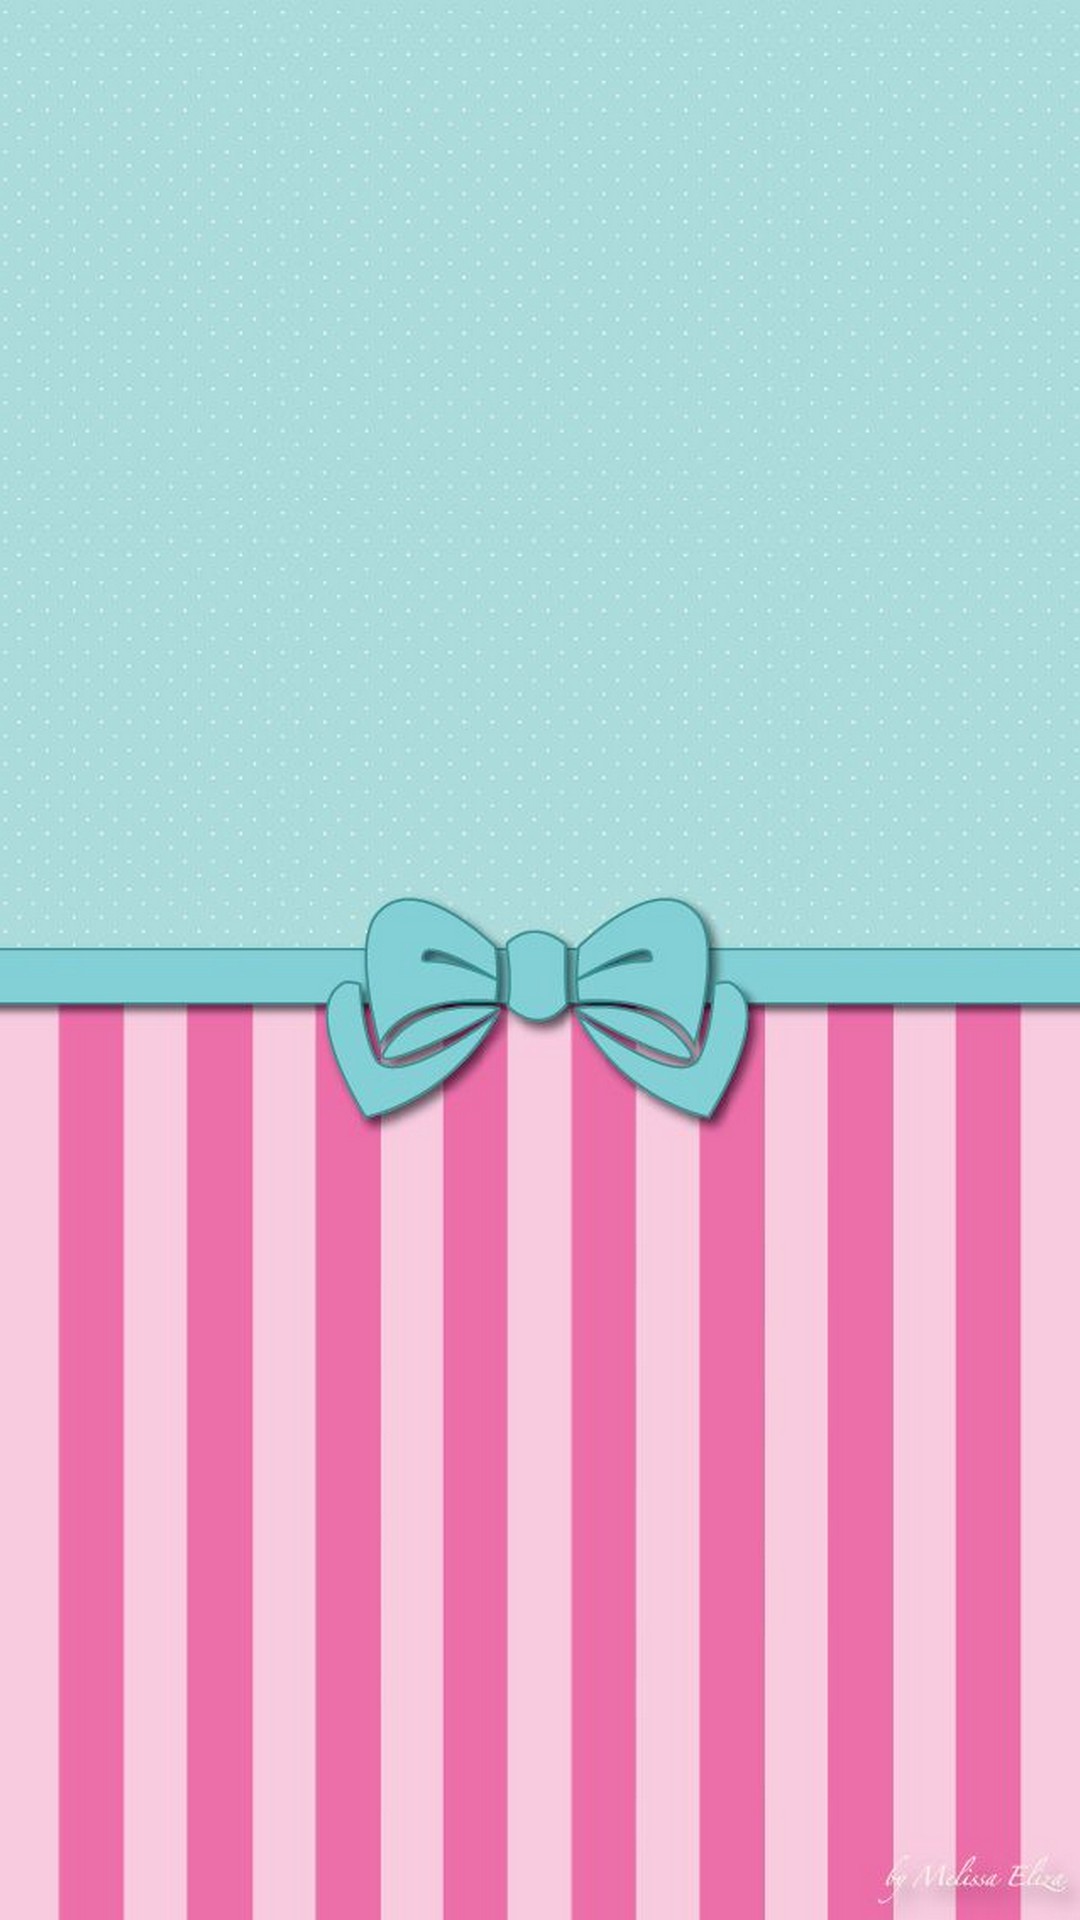 iPhone 7 Wallpaper Cute Green with image resolution 1080x1920 pixel. You can make this wallpaper for your iPhone 5, 6, 7, 8, X backgrounds, Mobile Screensaver, or iPad Lock Screen